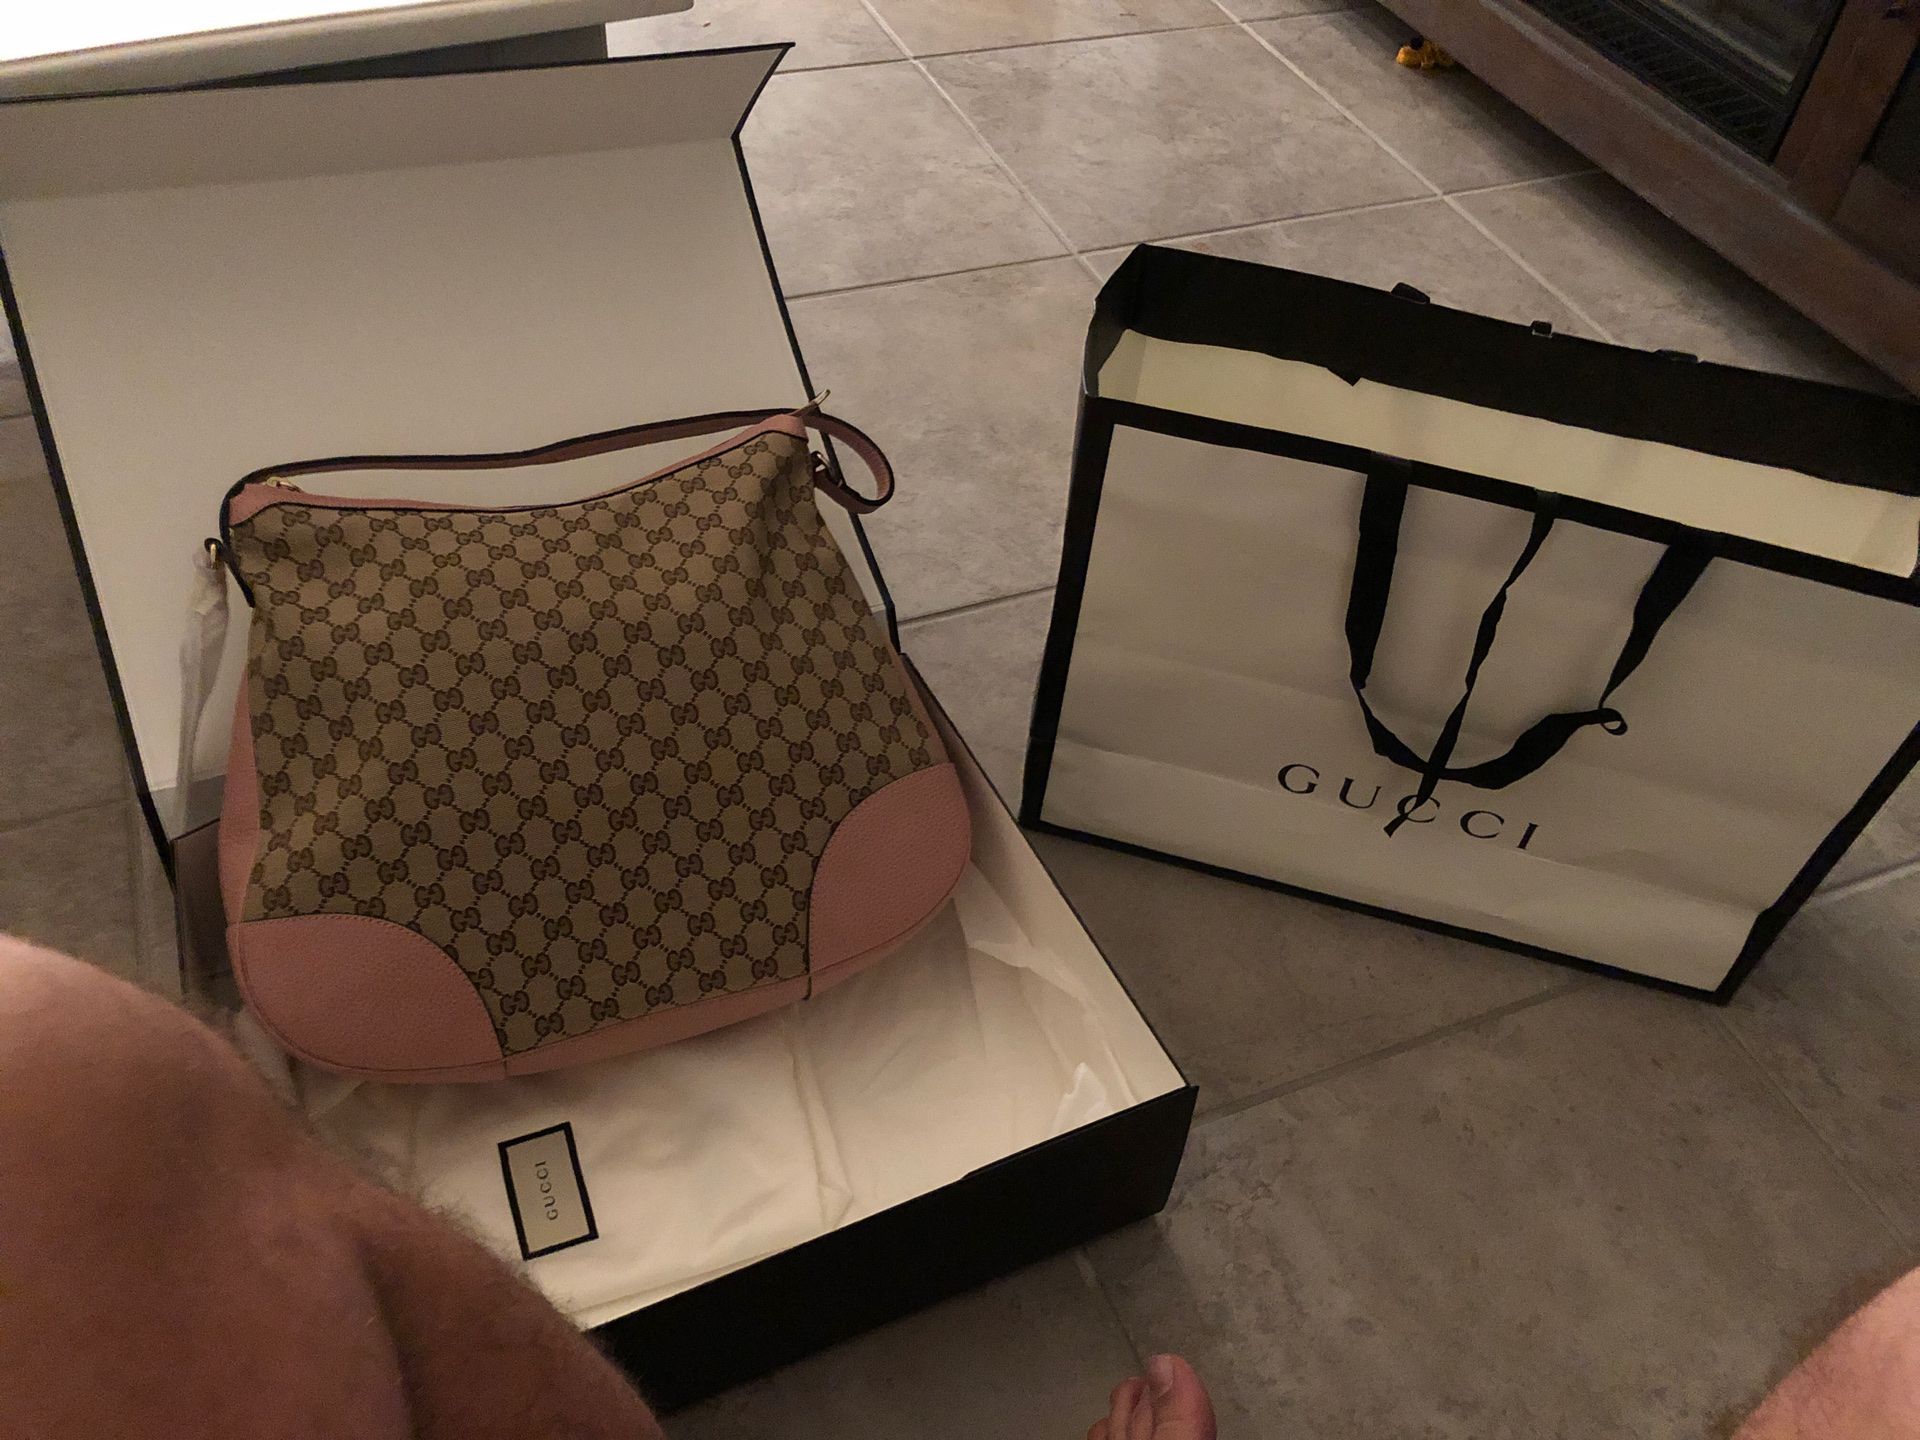 Gucci bag brand new never used